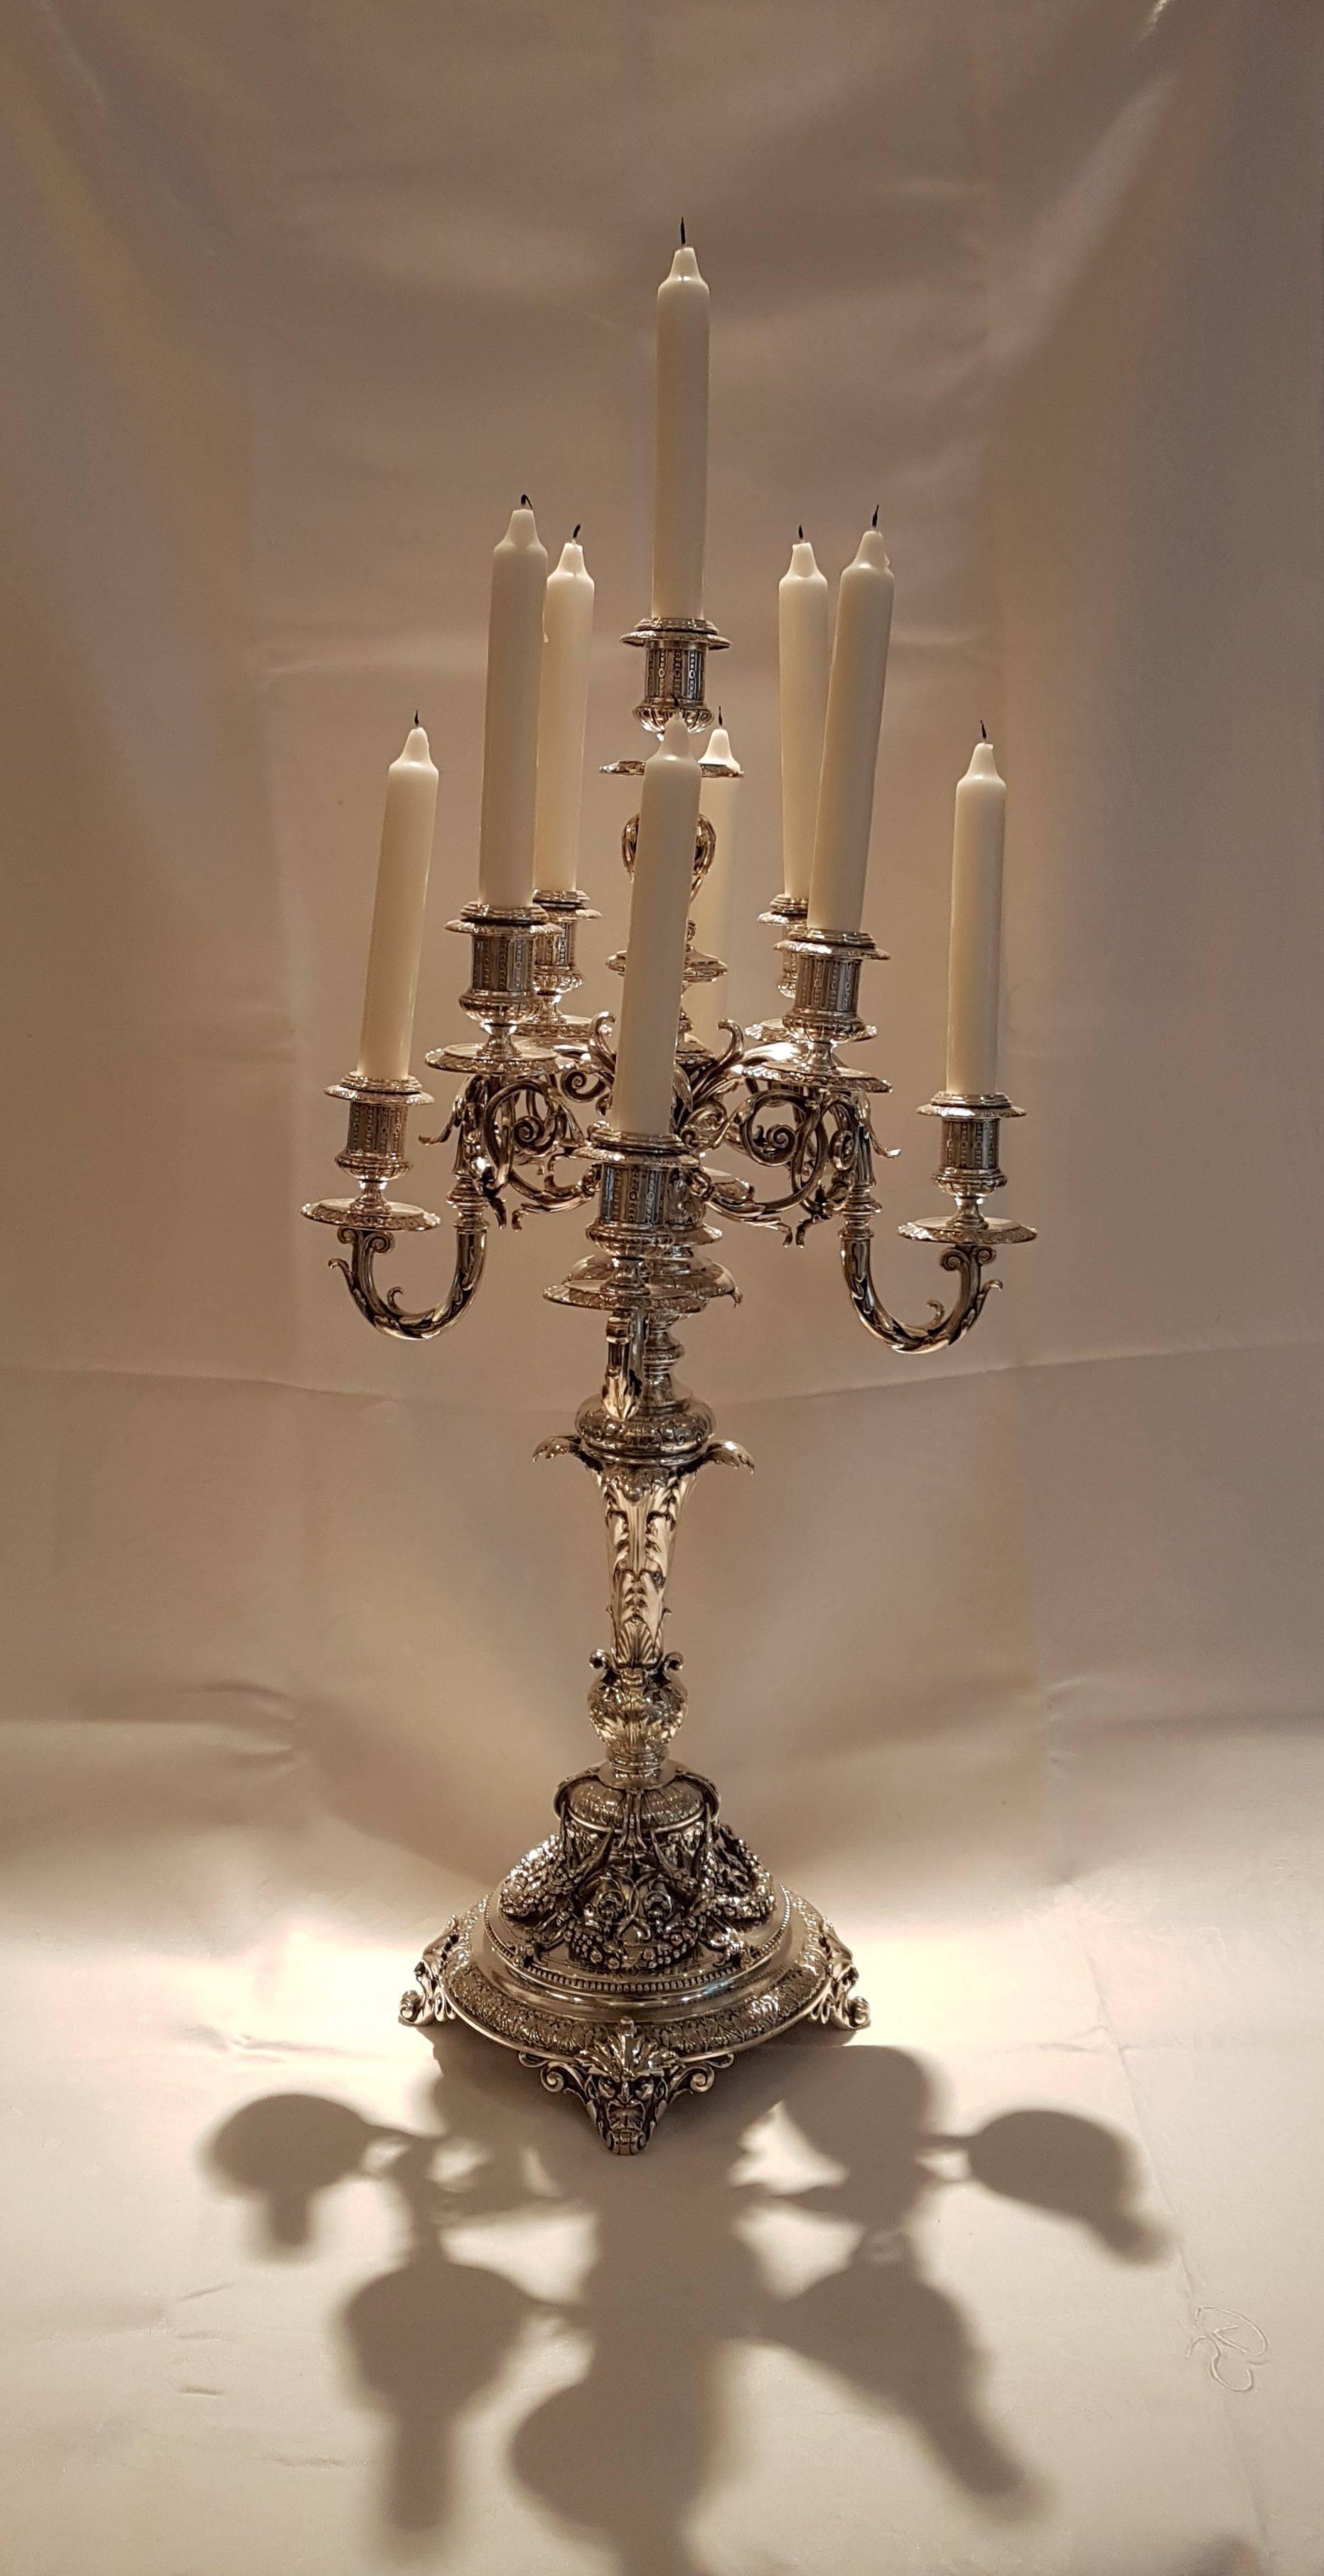 Extraordinary richly ornated 19th century nine light candelabra made of 800 Silver manufactured by Sy & Wagner 